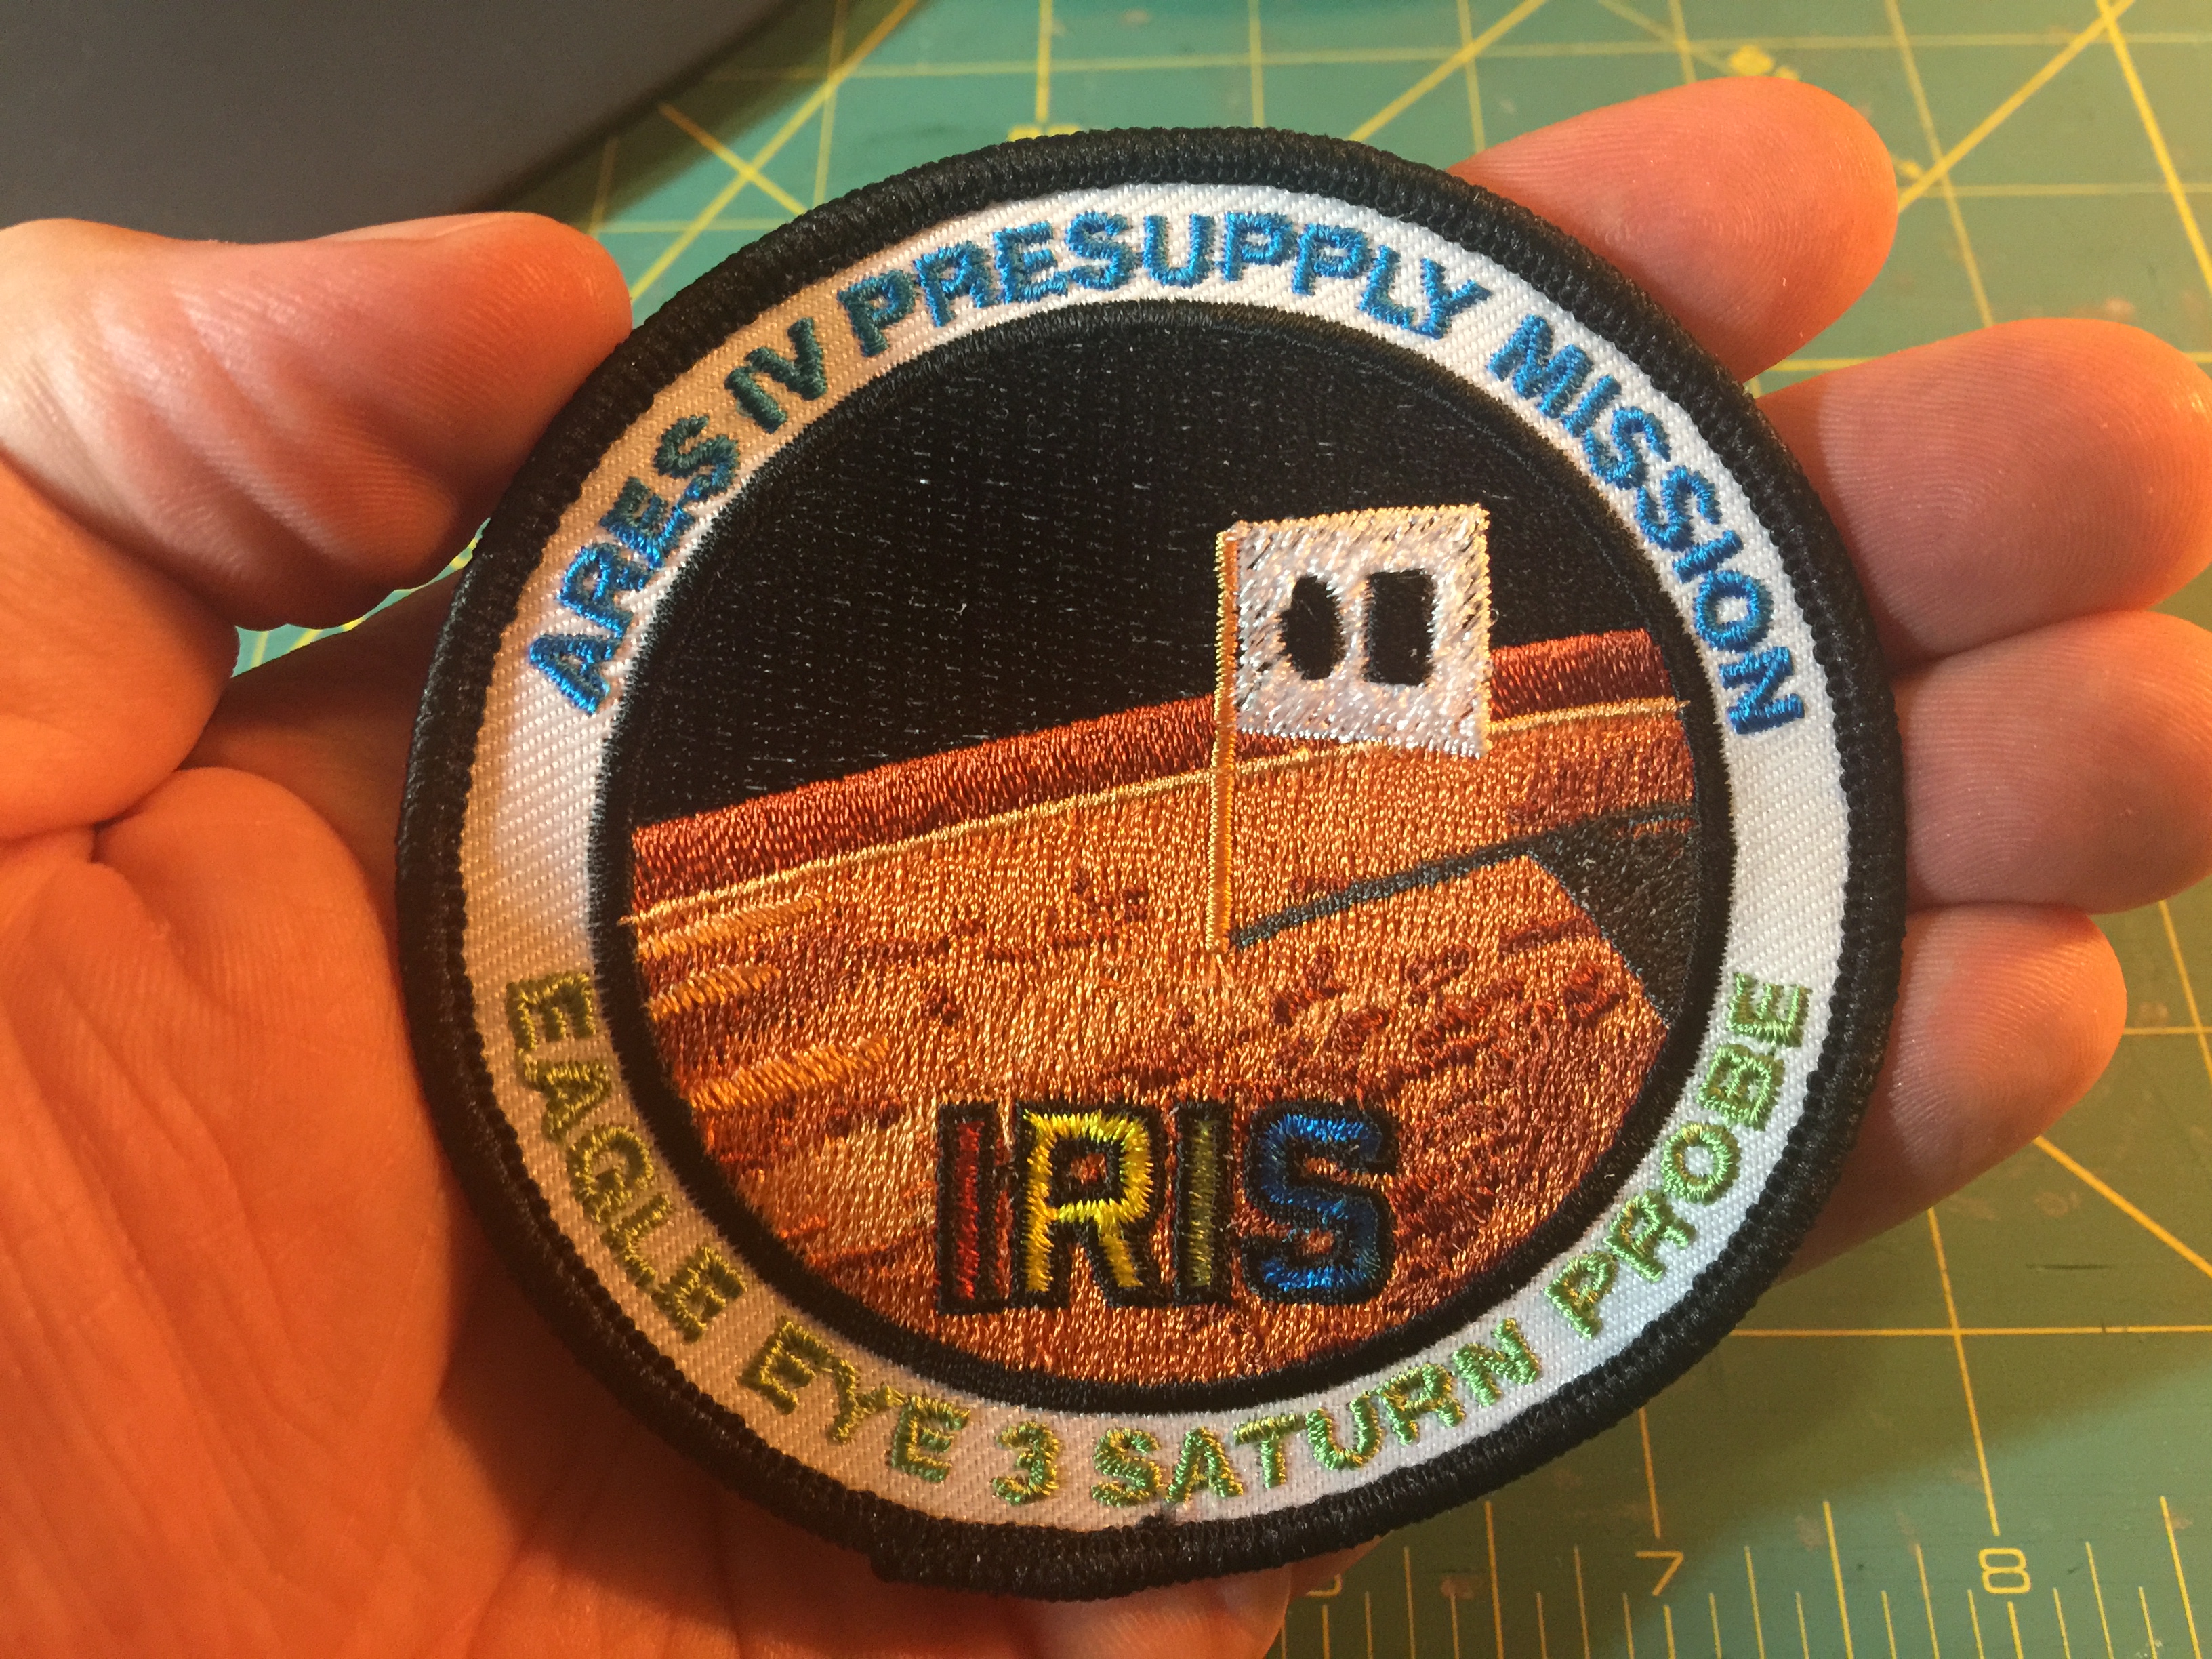 Final embroidered patch for The Martian: IRIS - ARES IV Presupply / Eagle Eye 3 Saturn Probe mission.